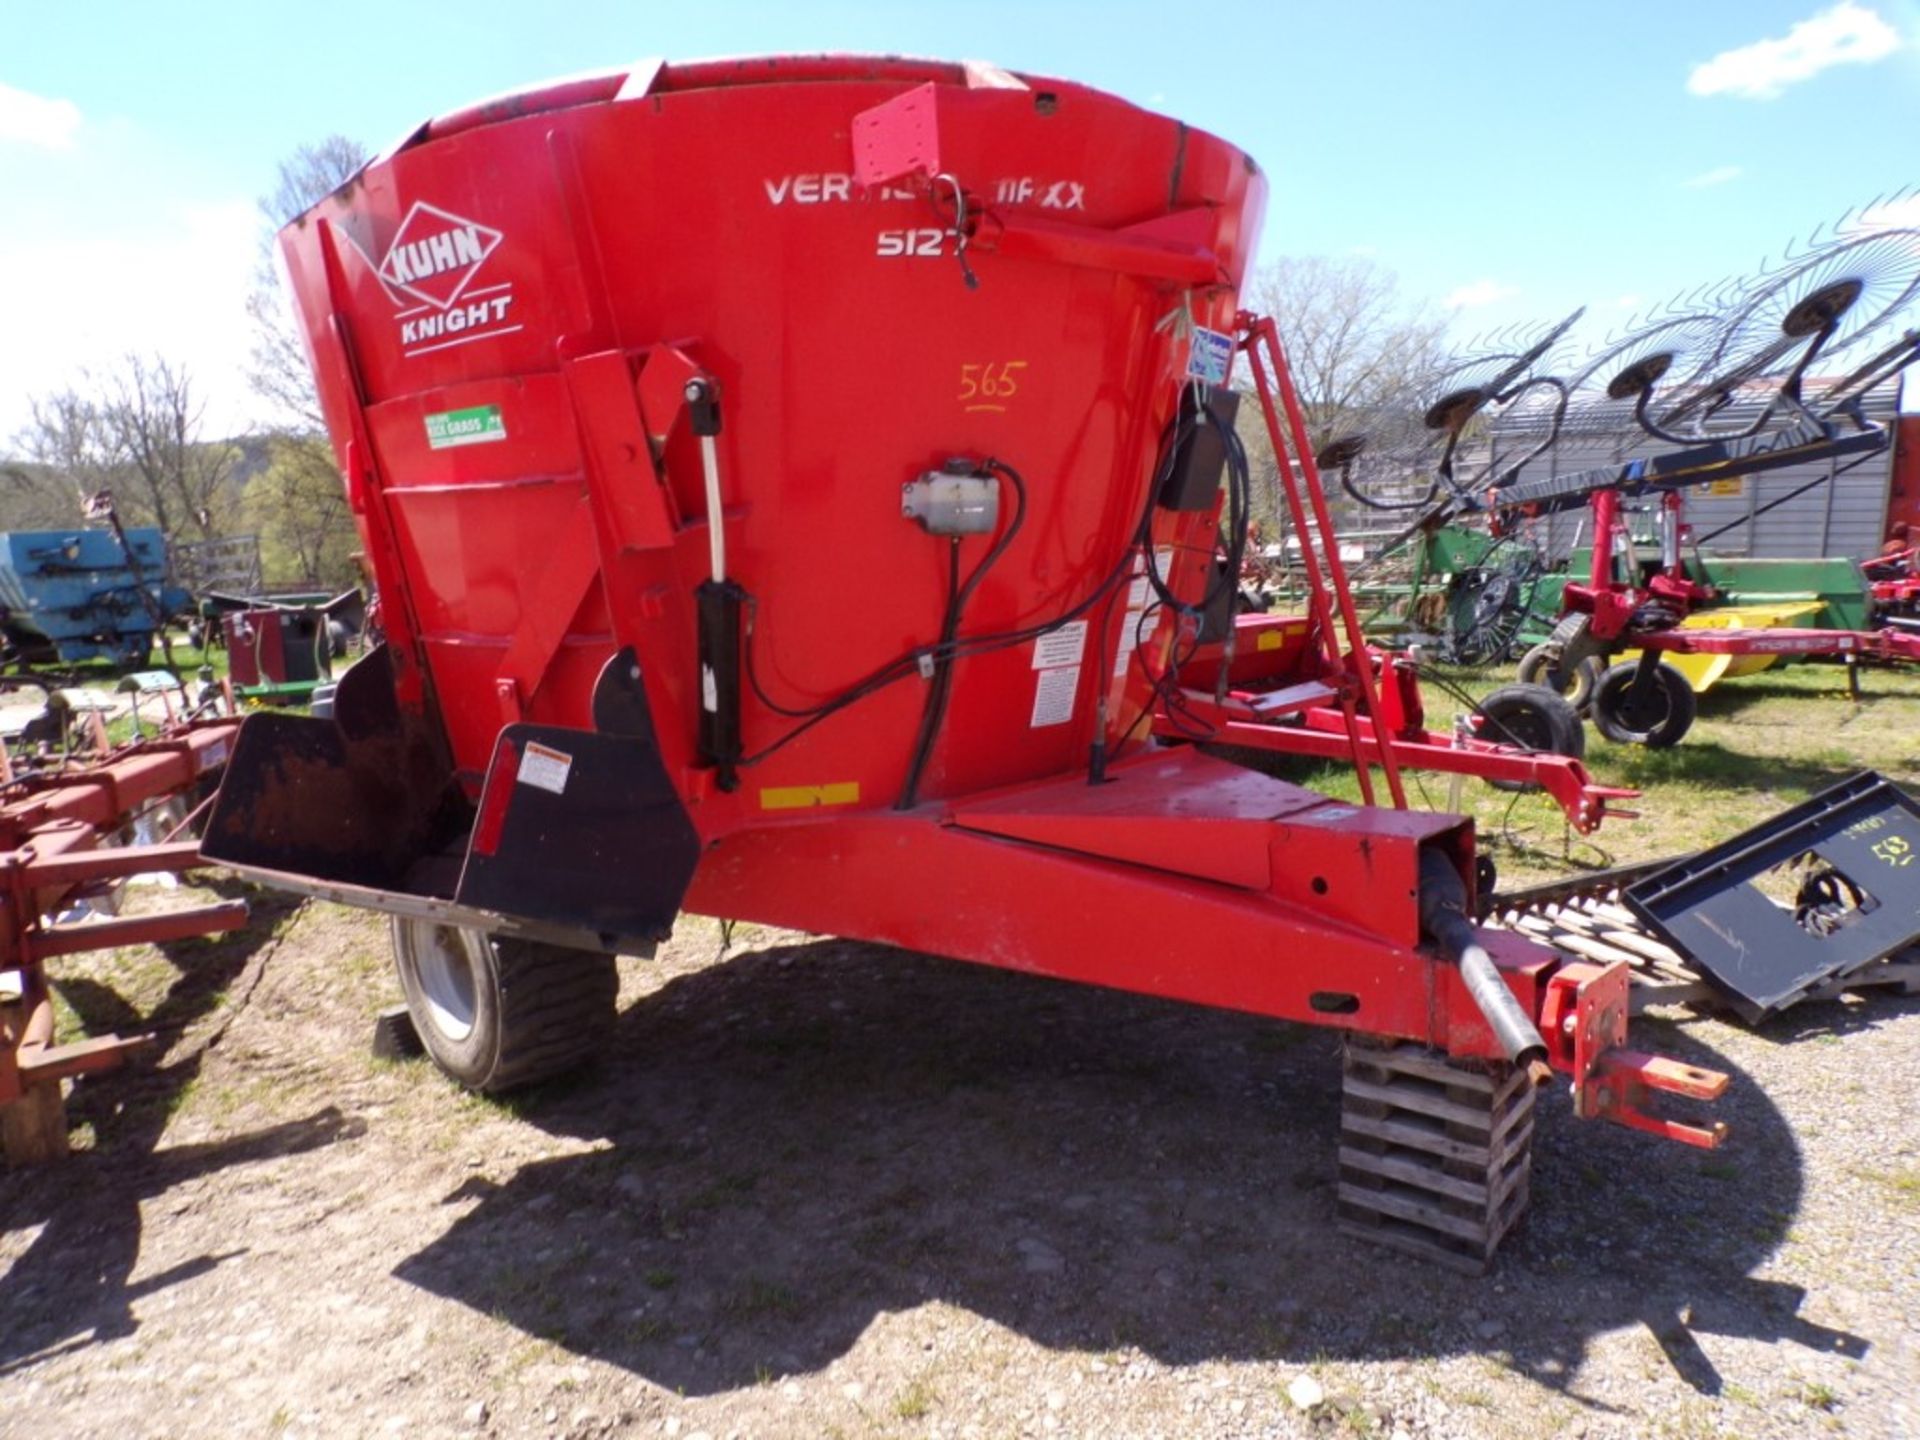 Kuhn 5127 Vertical Mixing/Feeder Wagon - Like New, Never Came w/Scales - Super Nice! (4395)